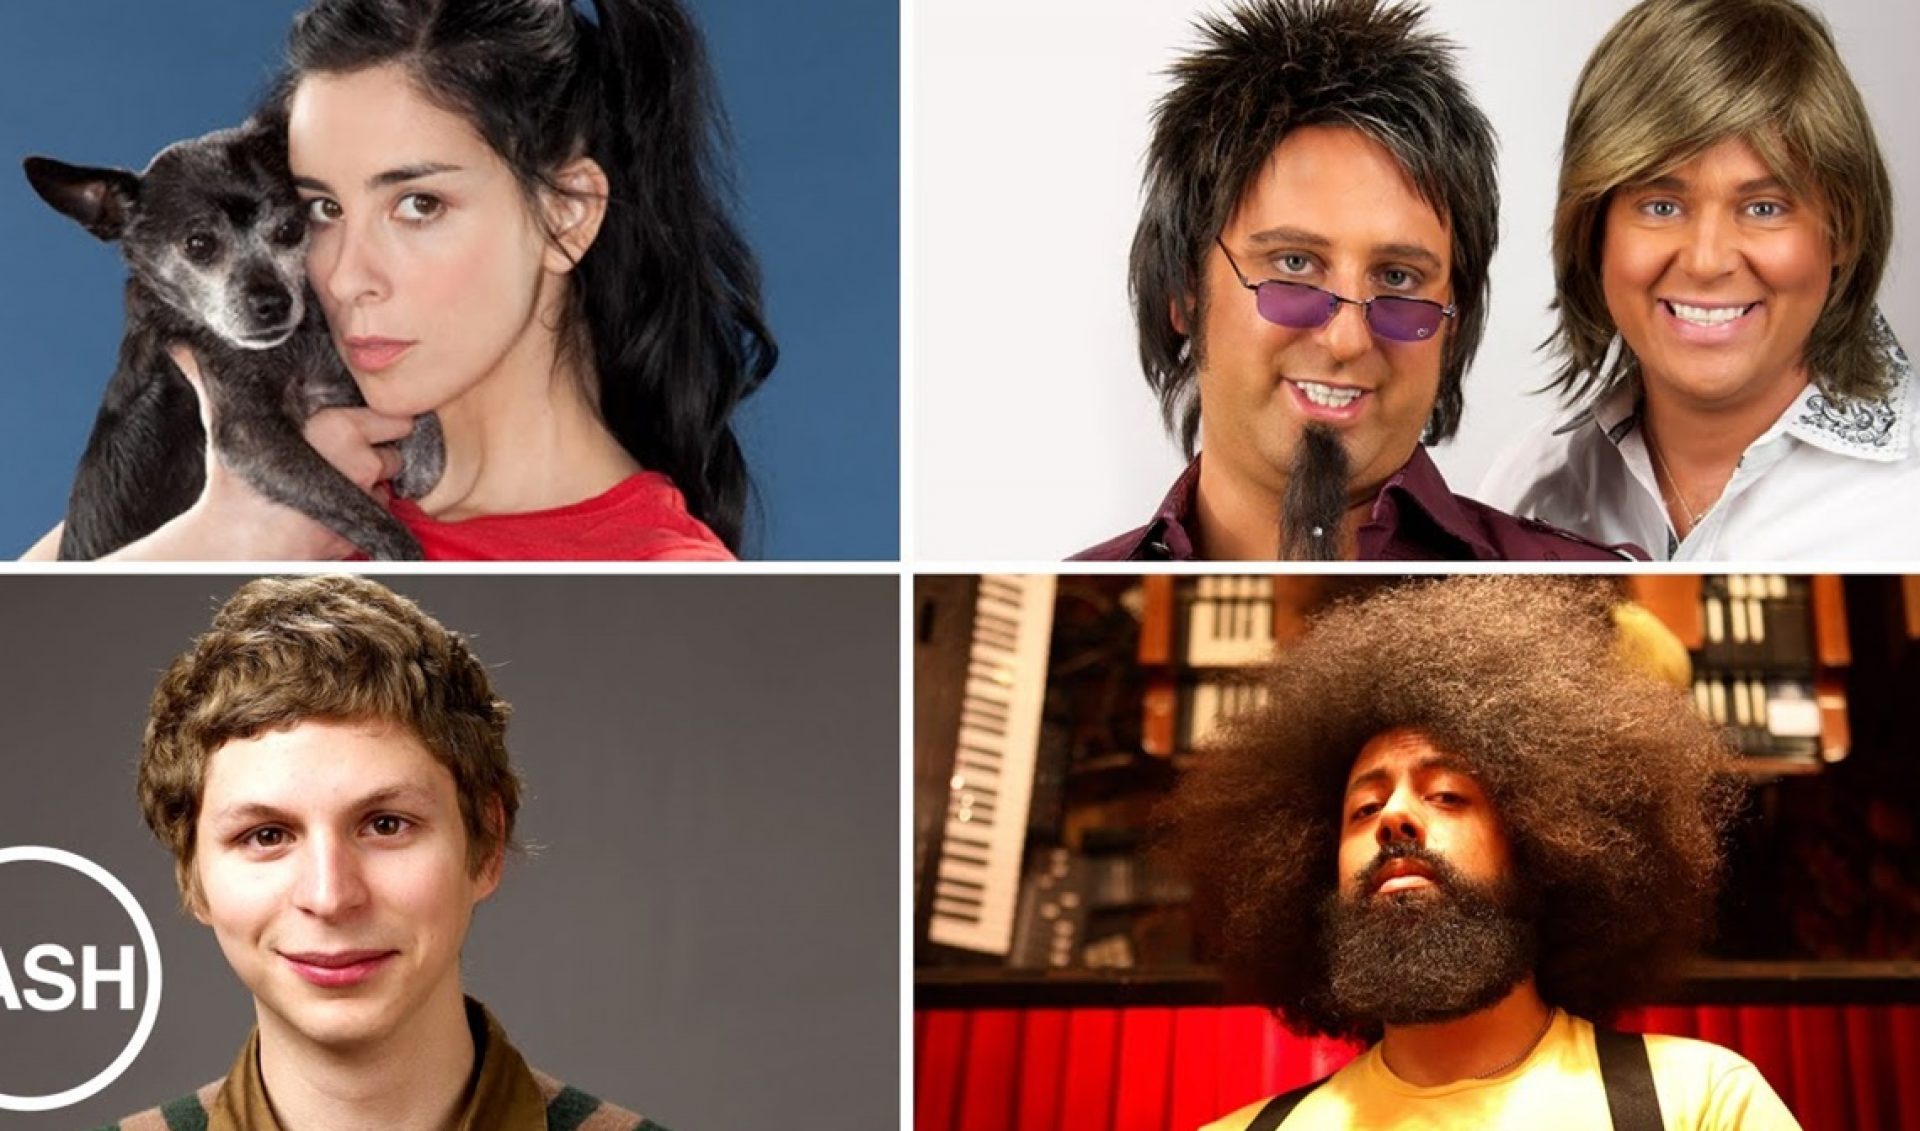 Jash Announces Inaugural Comedy Festival Featuring Sarah Silverman, Michael Cera And More